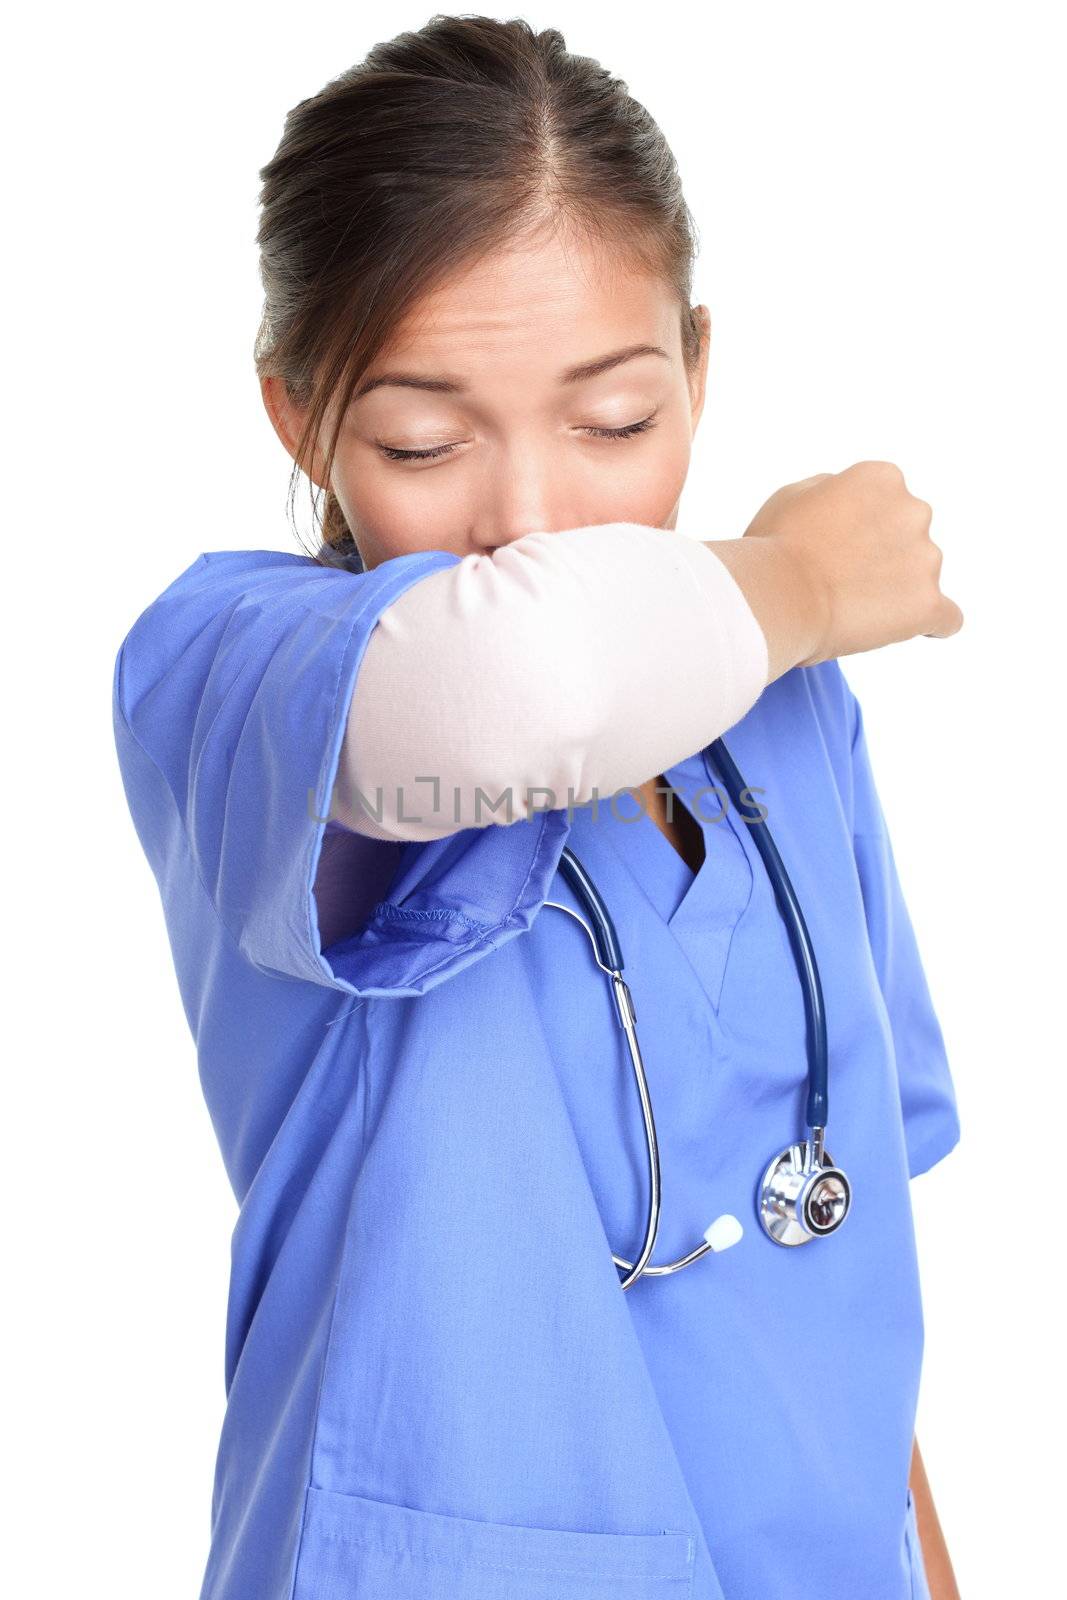 Sneezing woman medical nurse or doctor doing elbow sneeze being sick having the cold flu. Sneezing instruction concept with person in medical scrubs. Young female isolated on white background